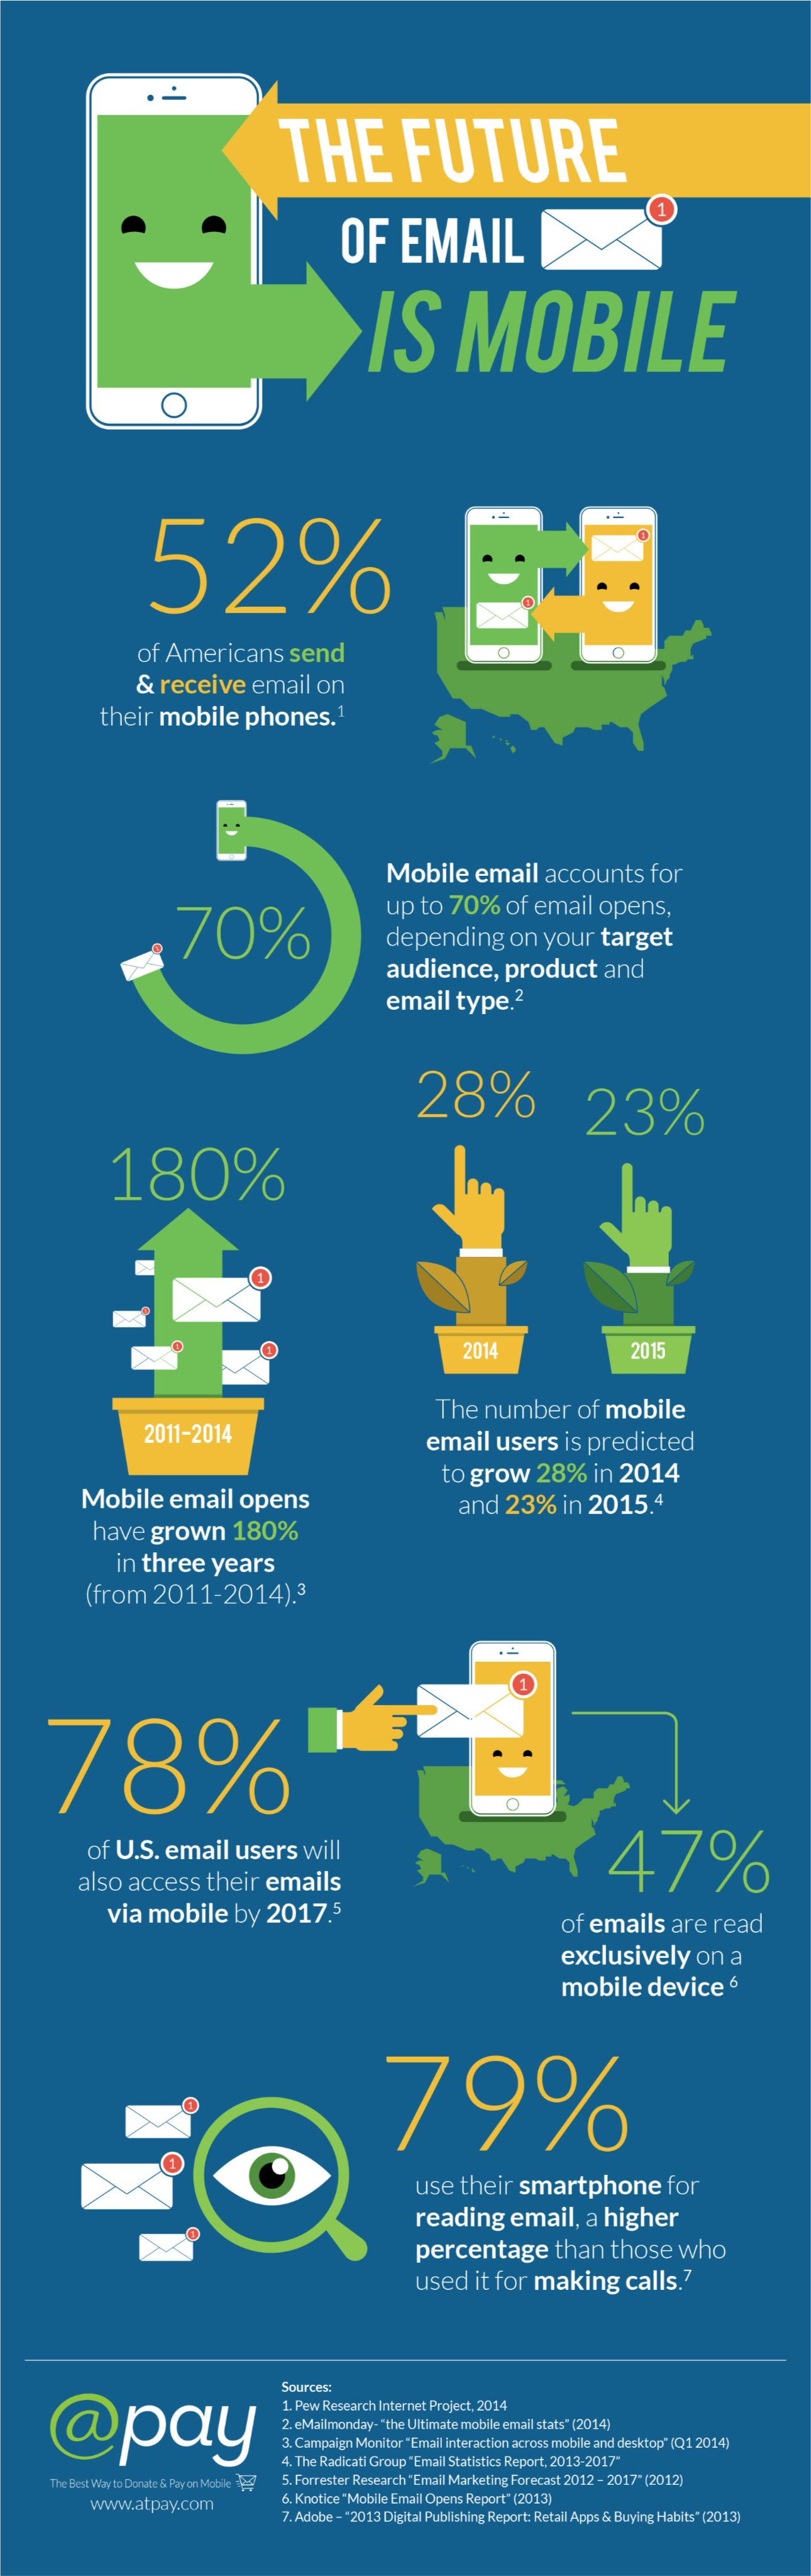 The Future of Email is Mobile